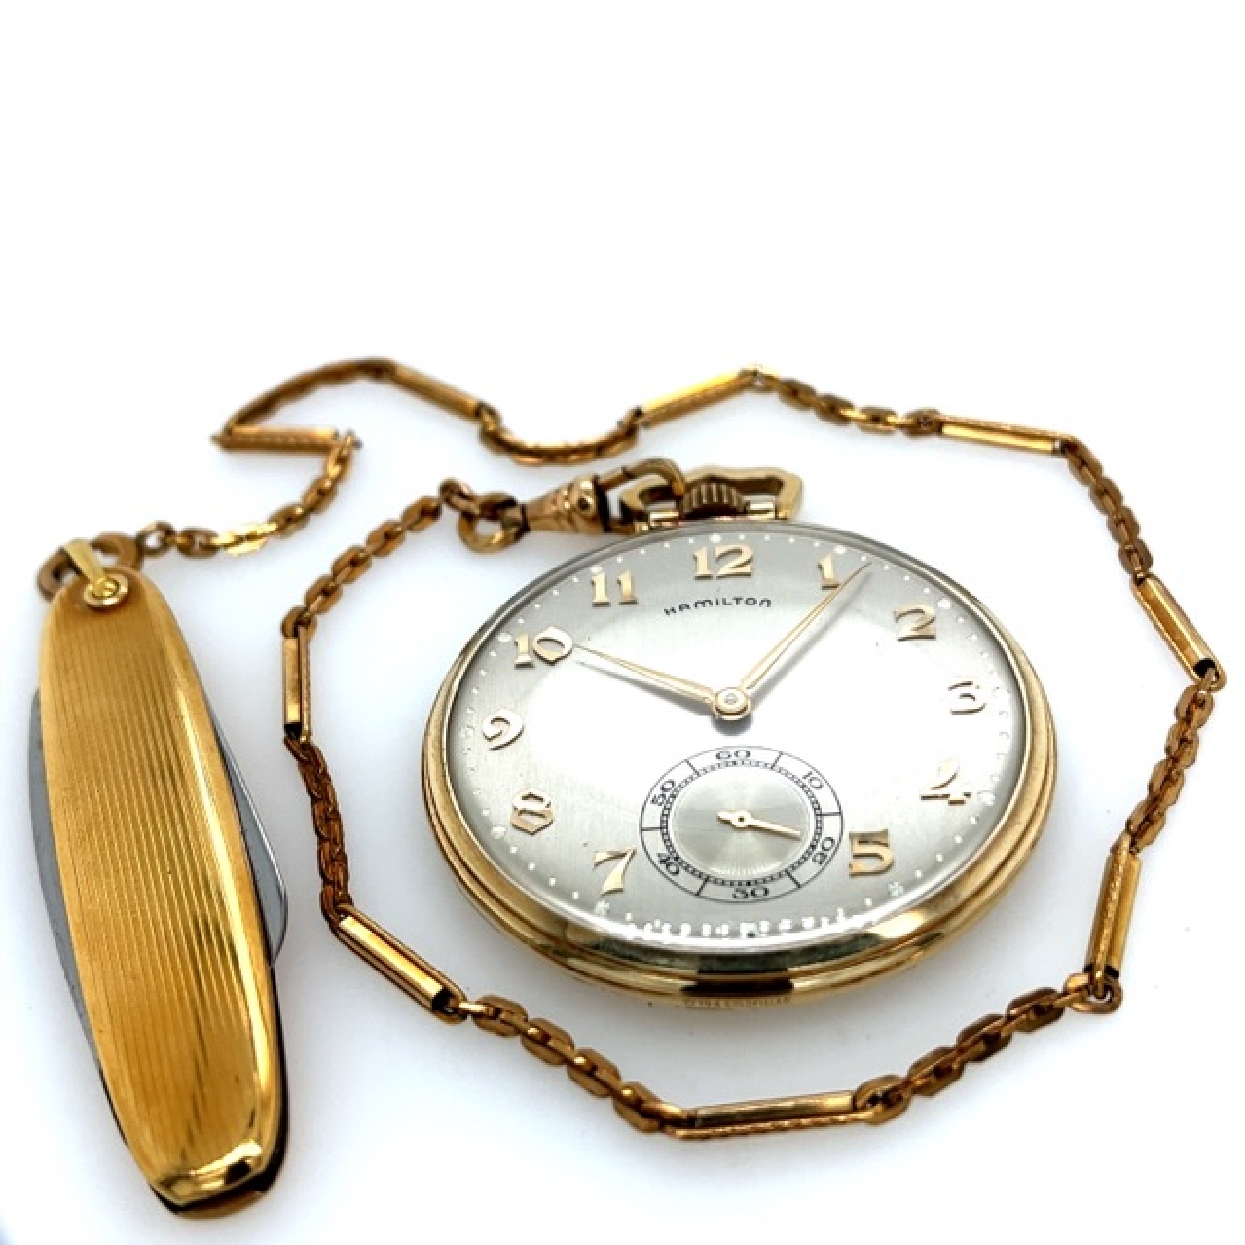 Hamilton 10K Gold Filled Pocket Watch with Chain and Pocket Knife Fob
In Original Box